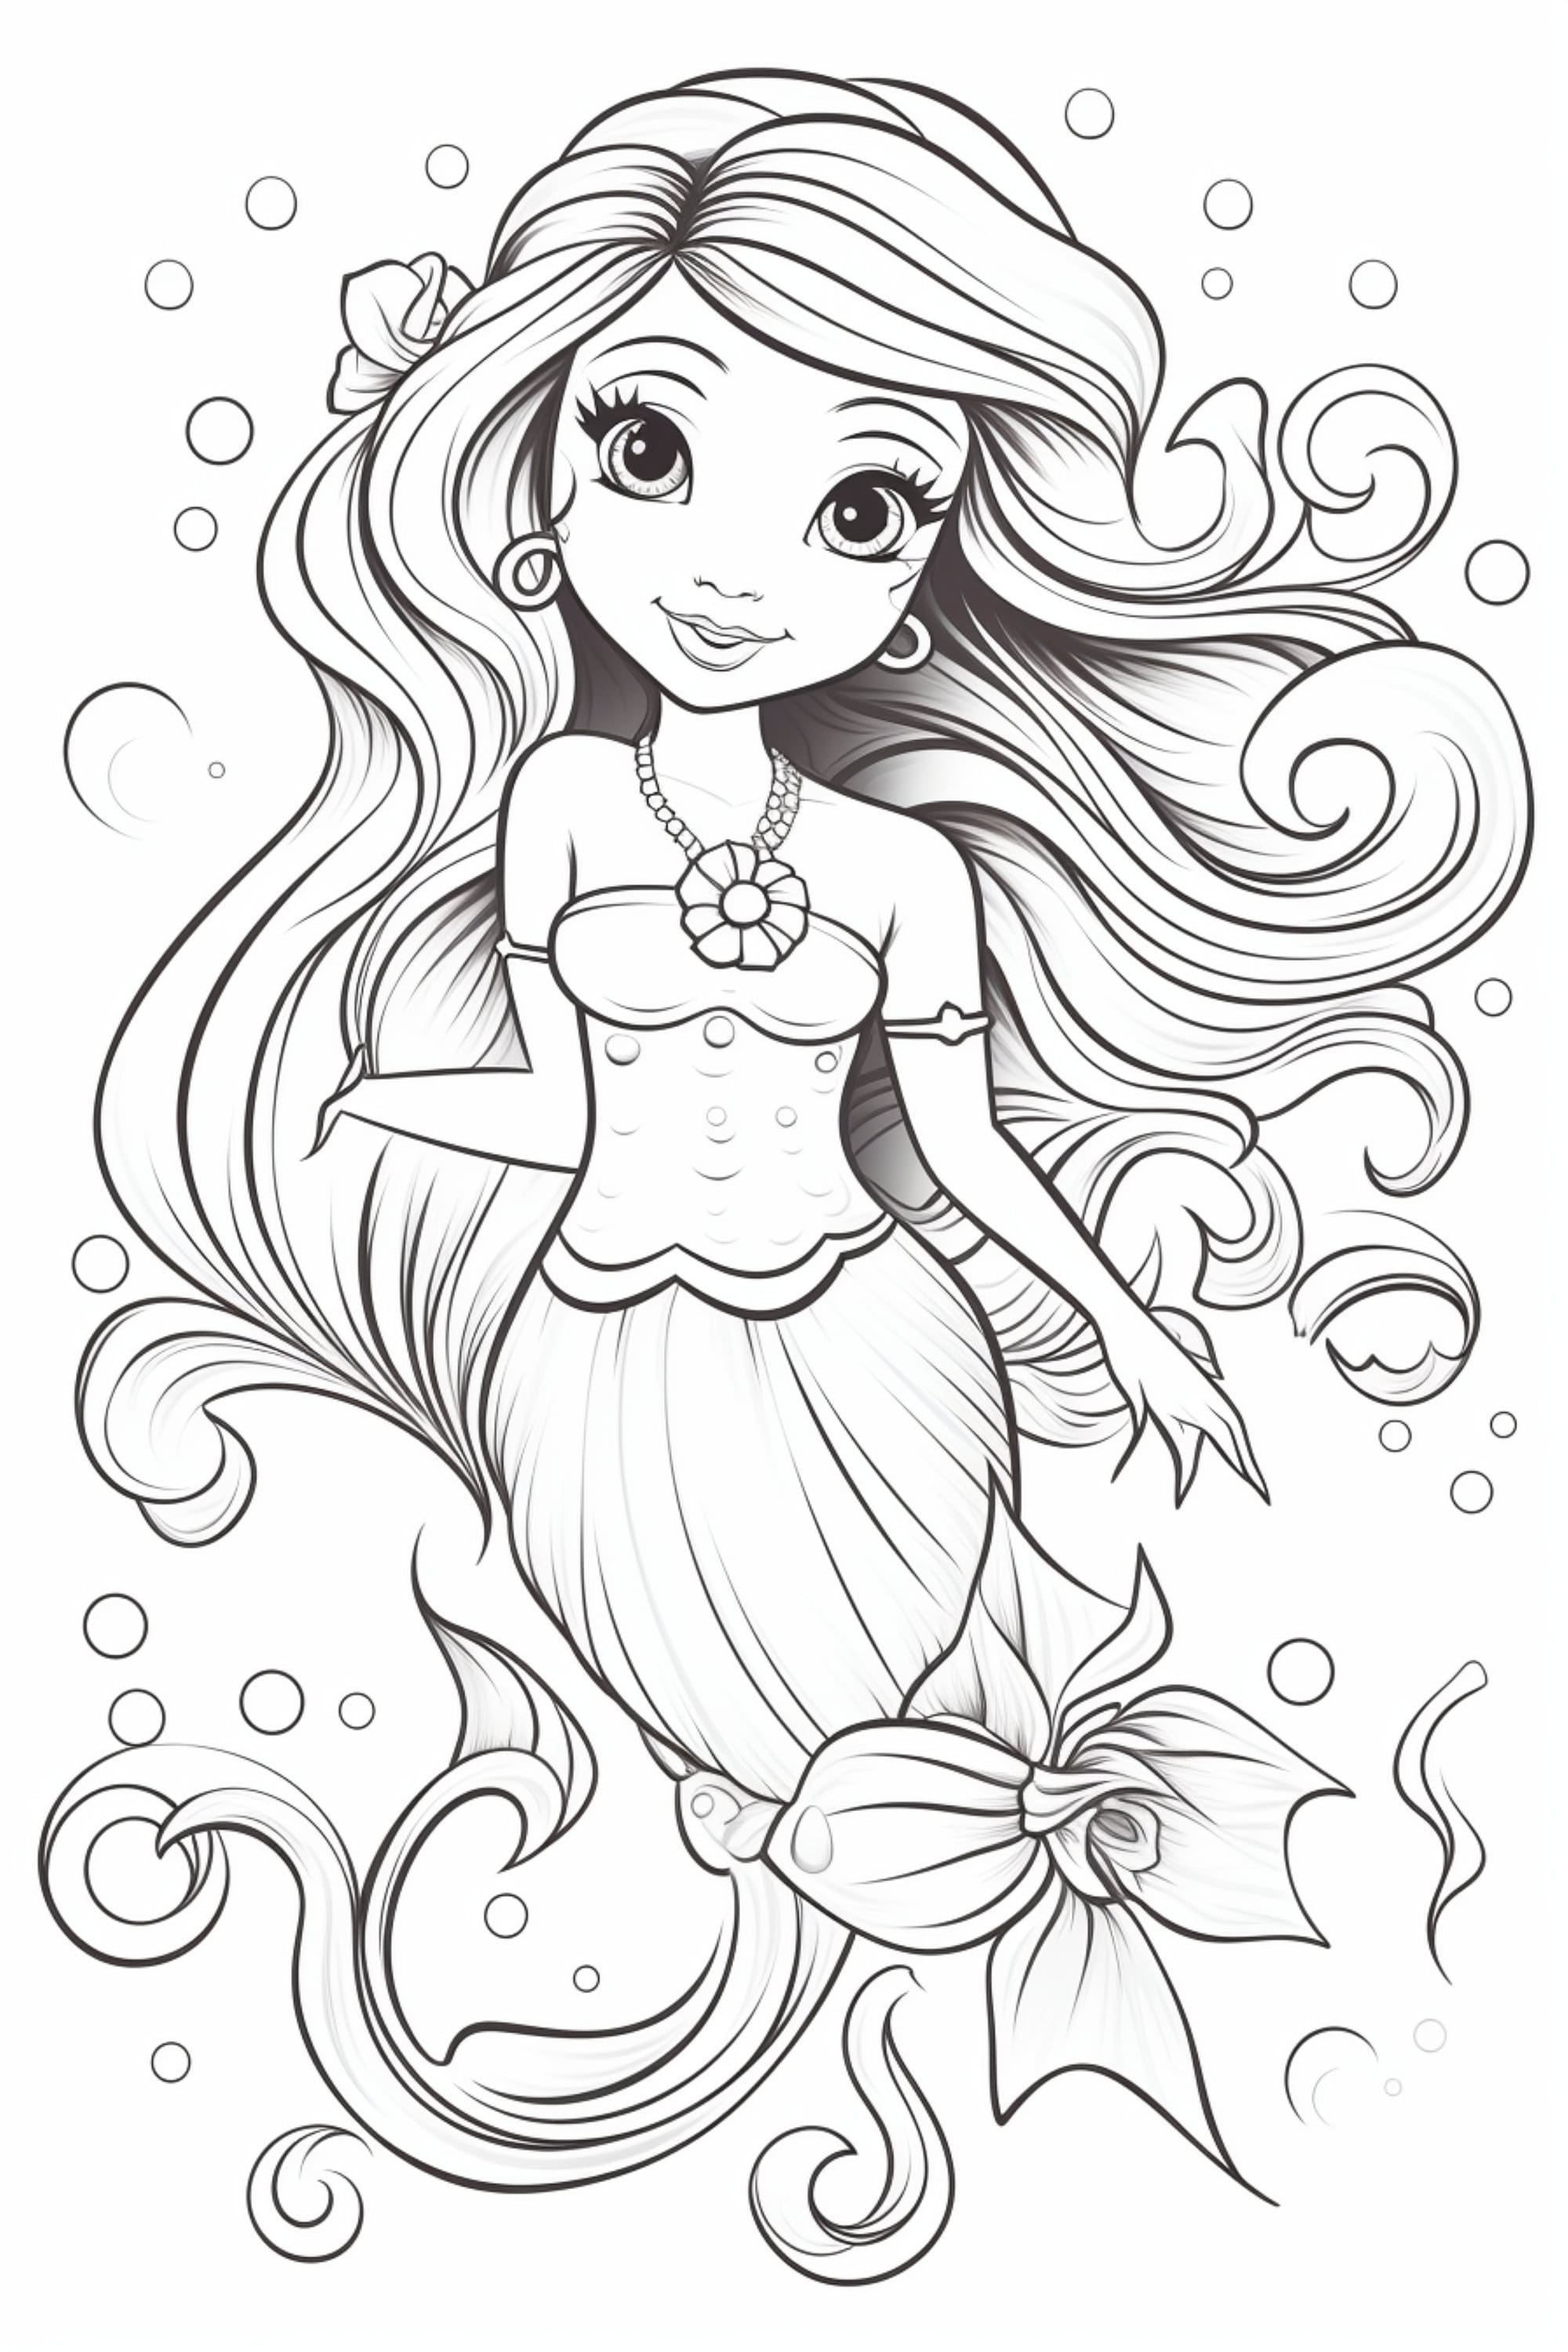 Mermaid 6 Coloring Pages 5 - Etsy